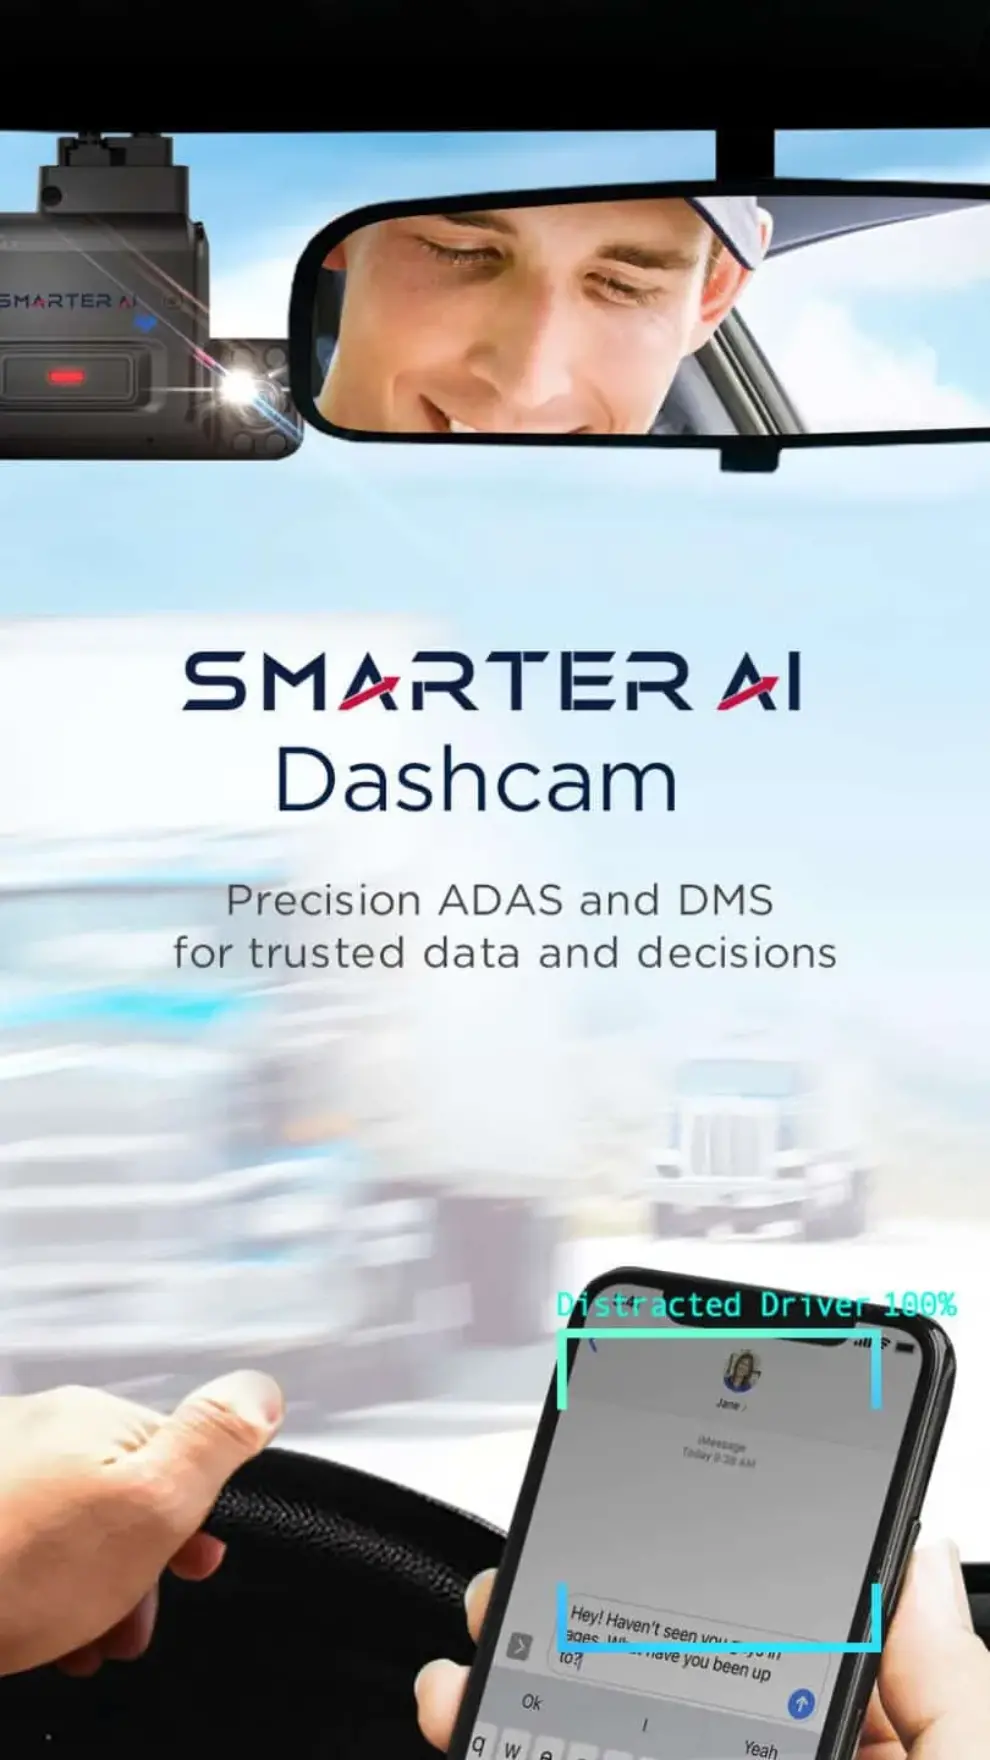 Smarter AI Featured in Video Telematics Report from ABI Research